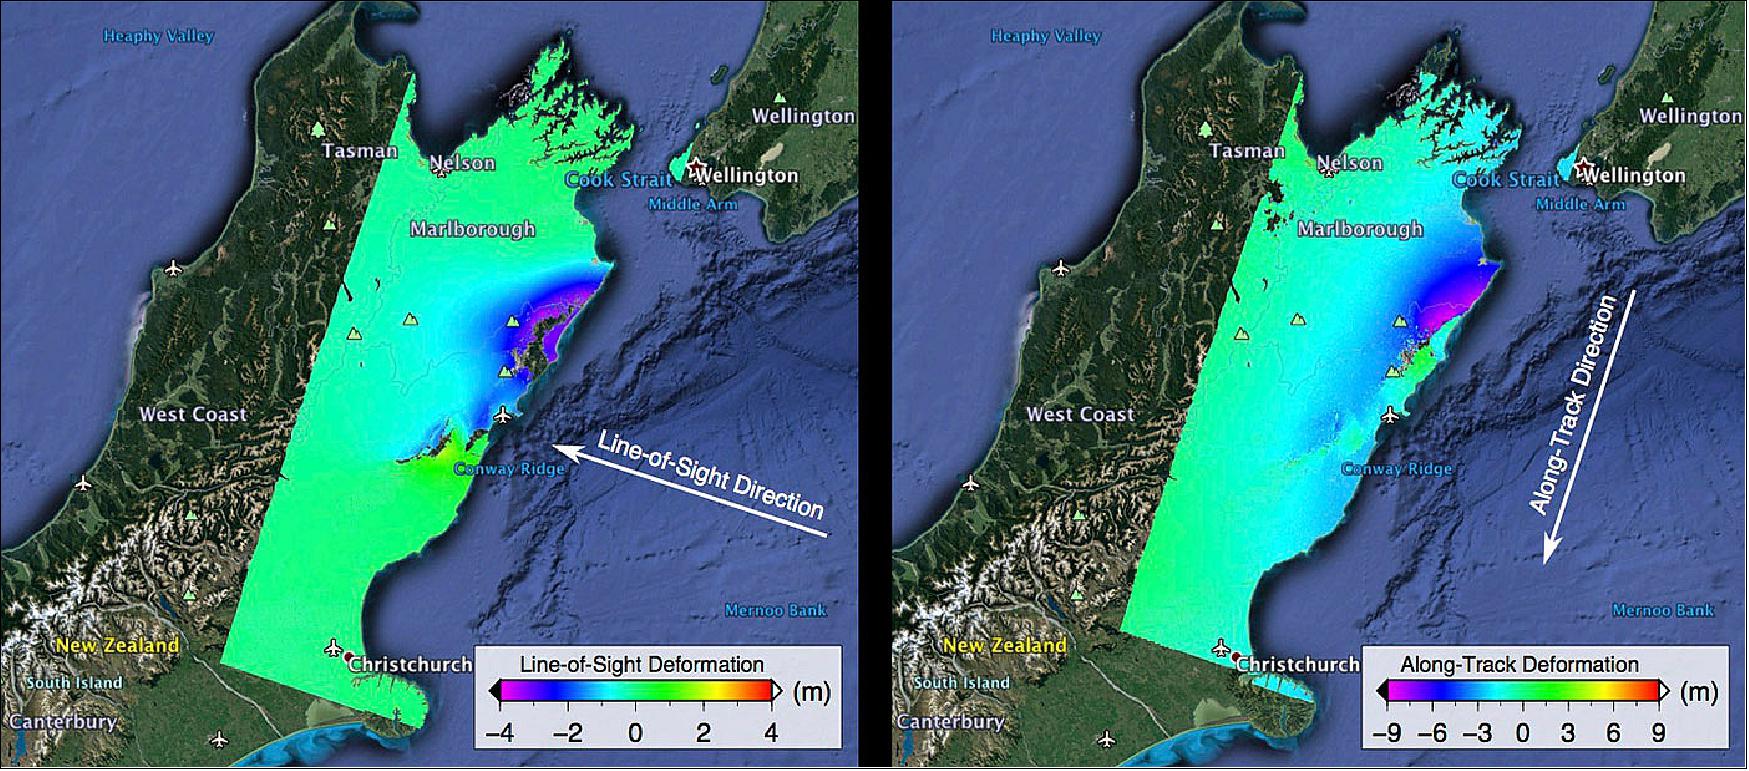 Figure 36: Two ALOS-2 satellite images show ground displacements from the Nov. 2016 Kaikoura earthquake as colors proportional to the surface motion in two directions. The purple areas in the left image moved up and east 4 m; purple areas in the right image moved north up to9 m (image credit: NASA/JPL-Caltech/JAXA)